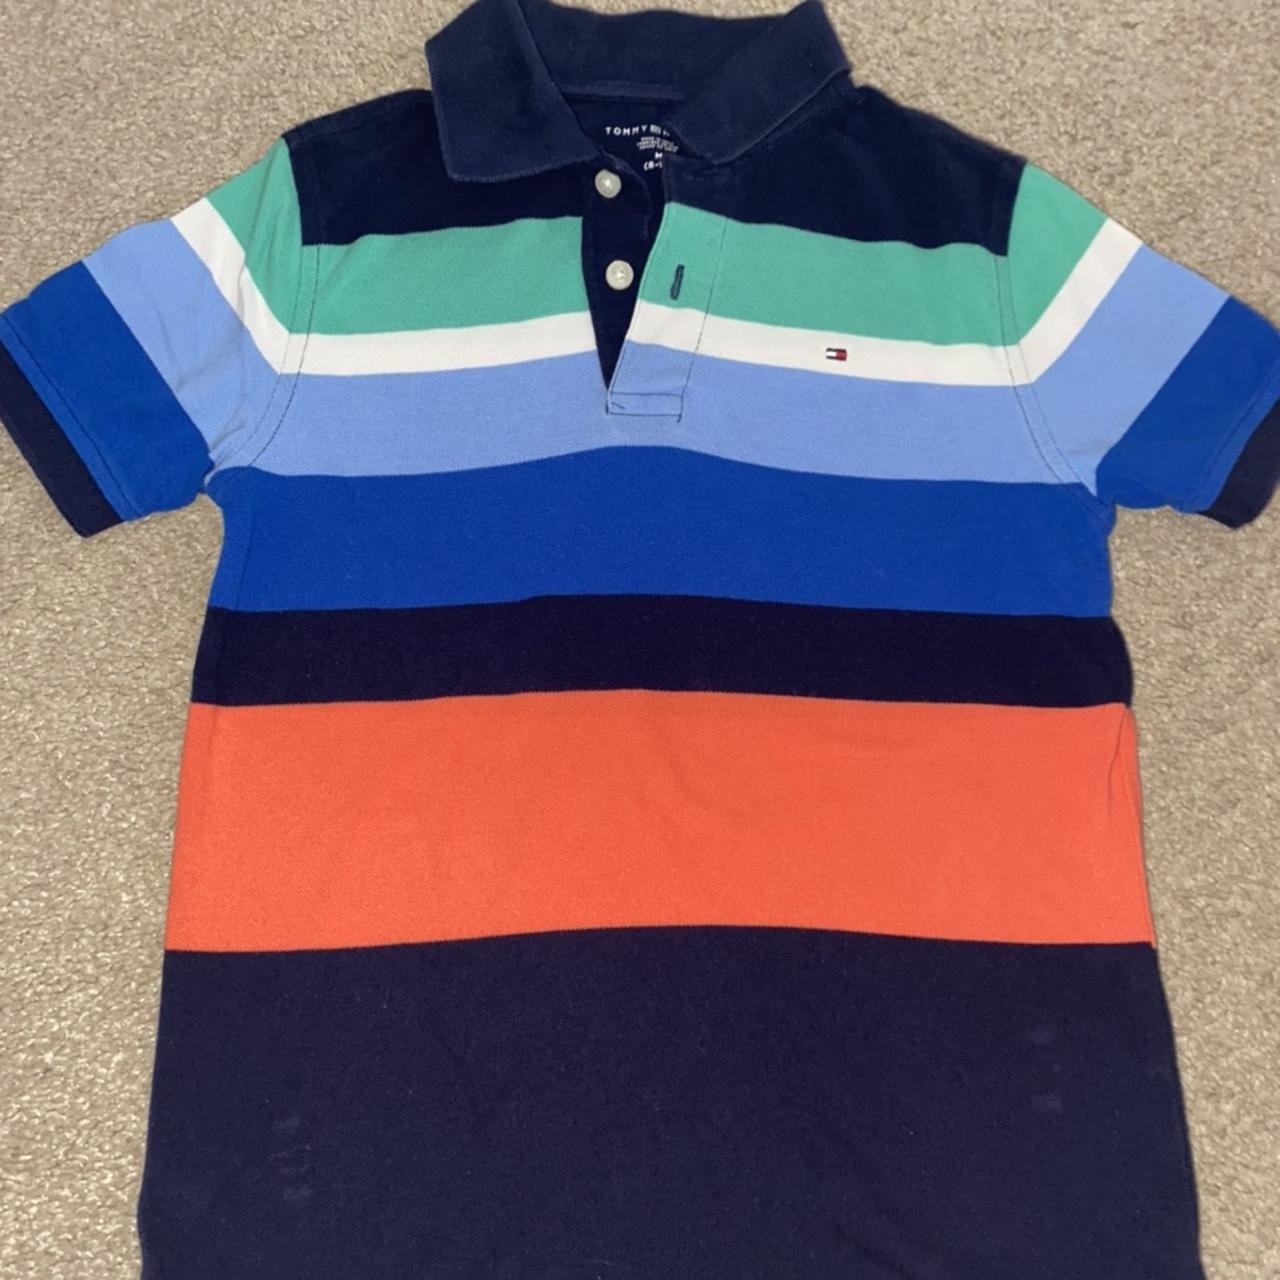 Tommy Hilfiger stripe polo shirt age 8-10 years in... - Depop